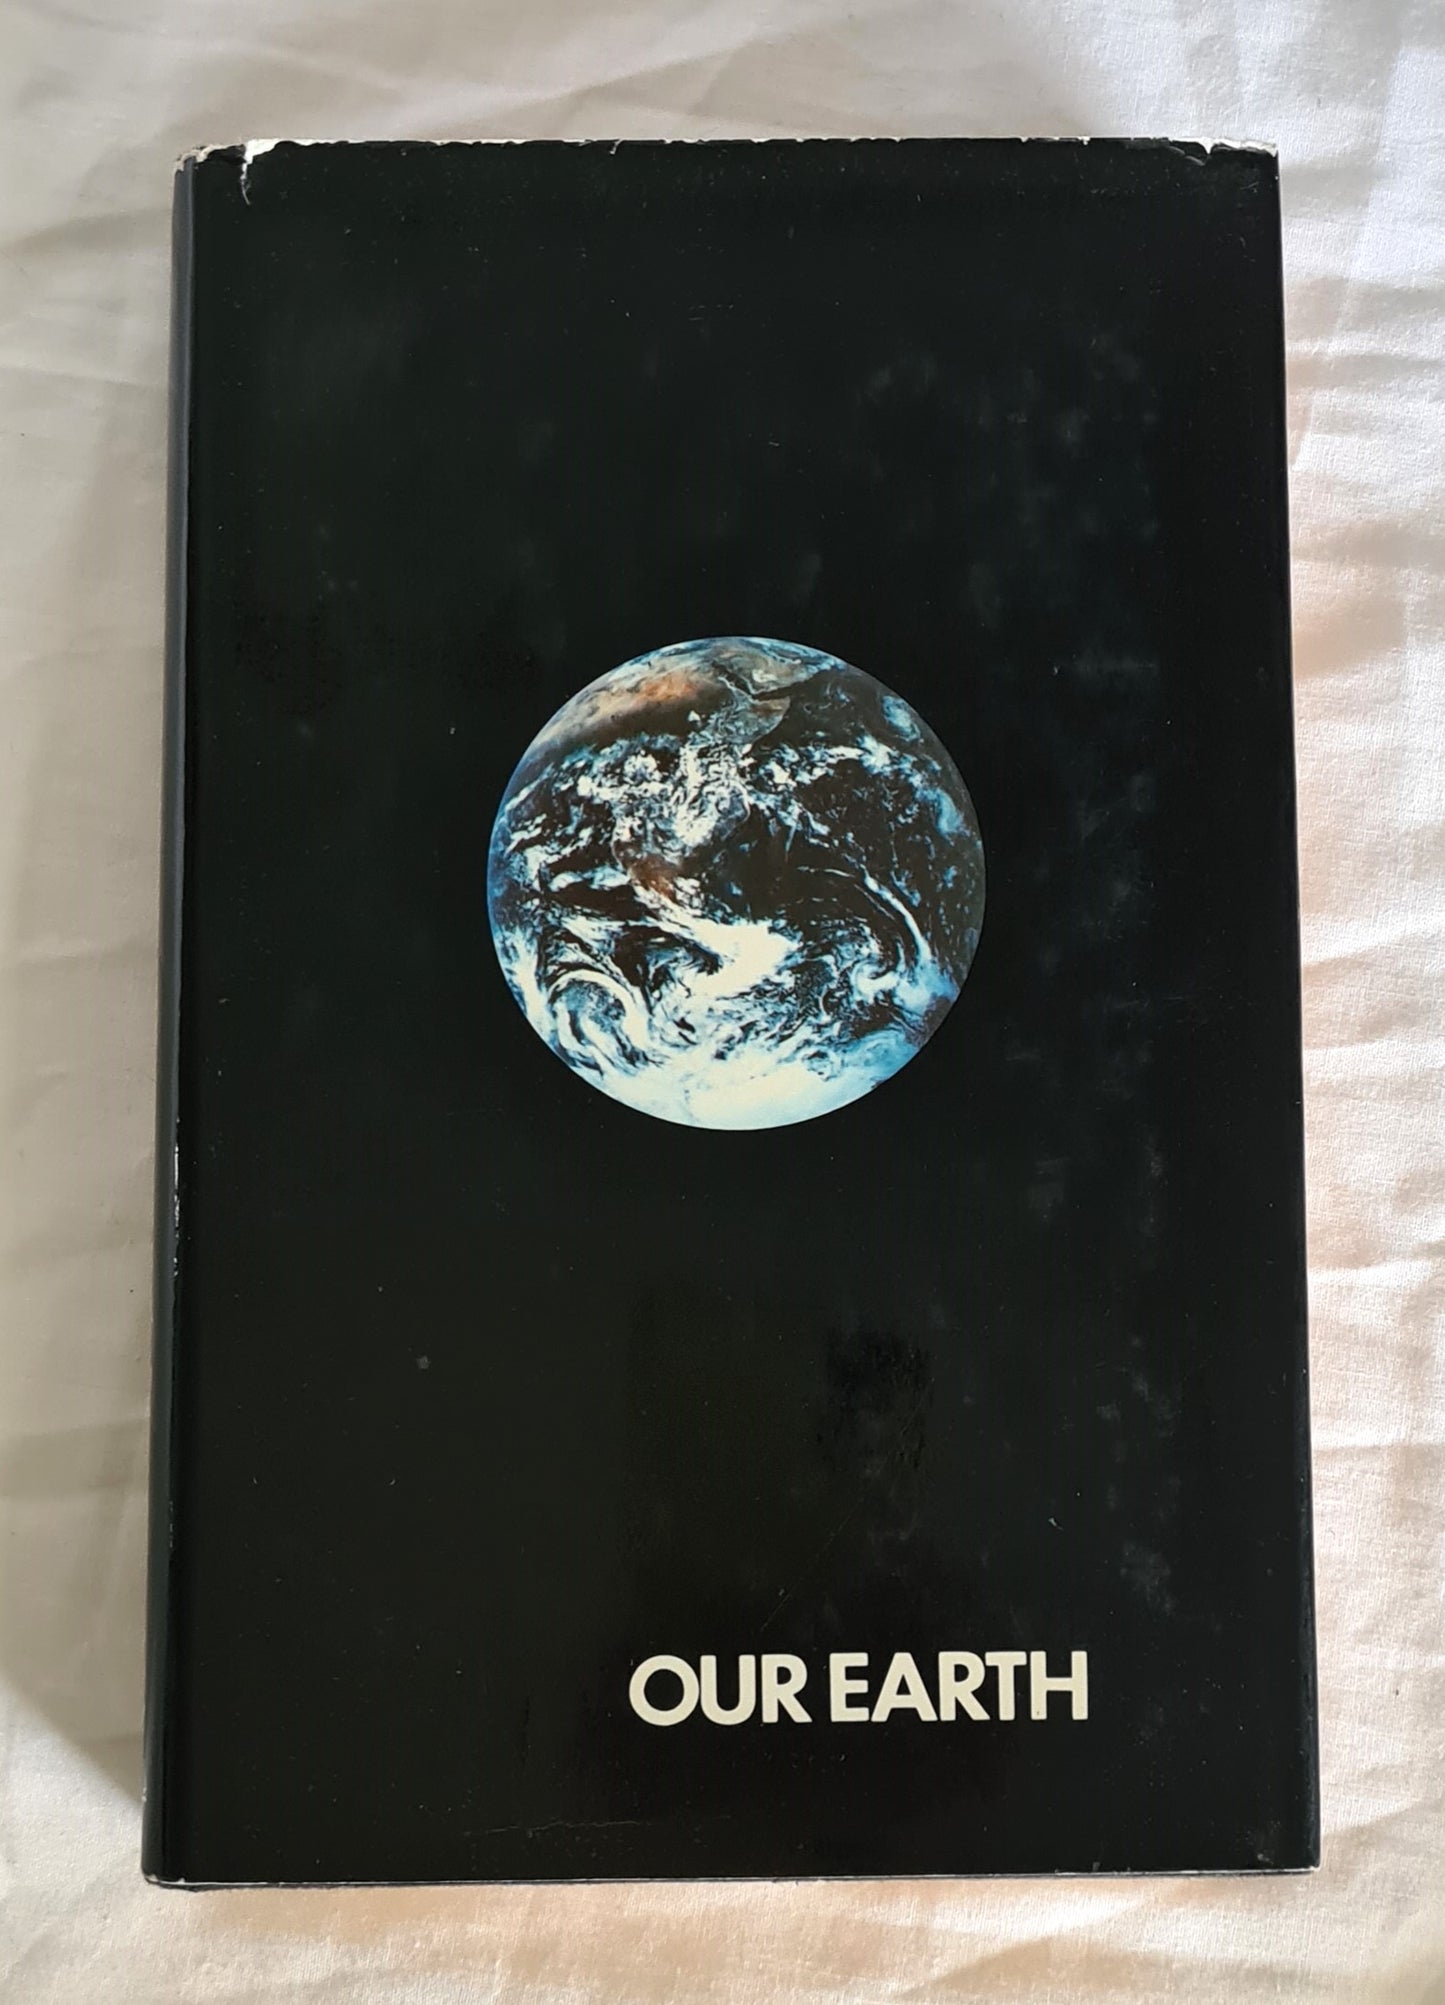 Our Earth  Edited by H. Messel and S. T. Butler